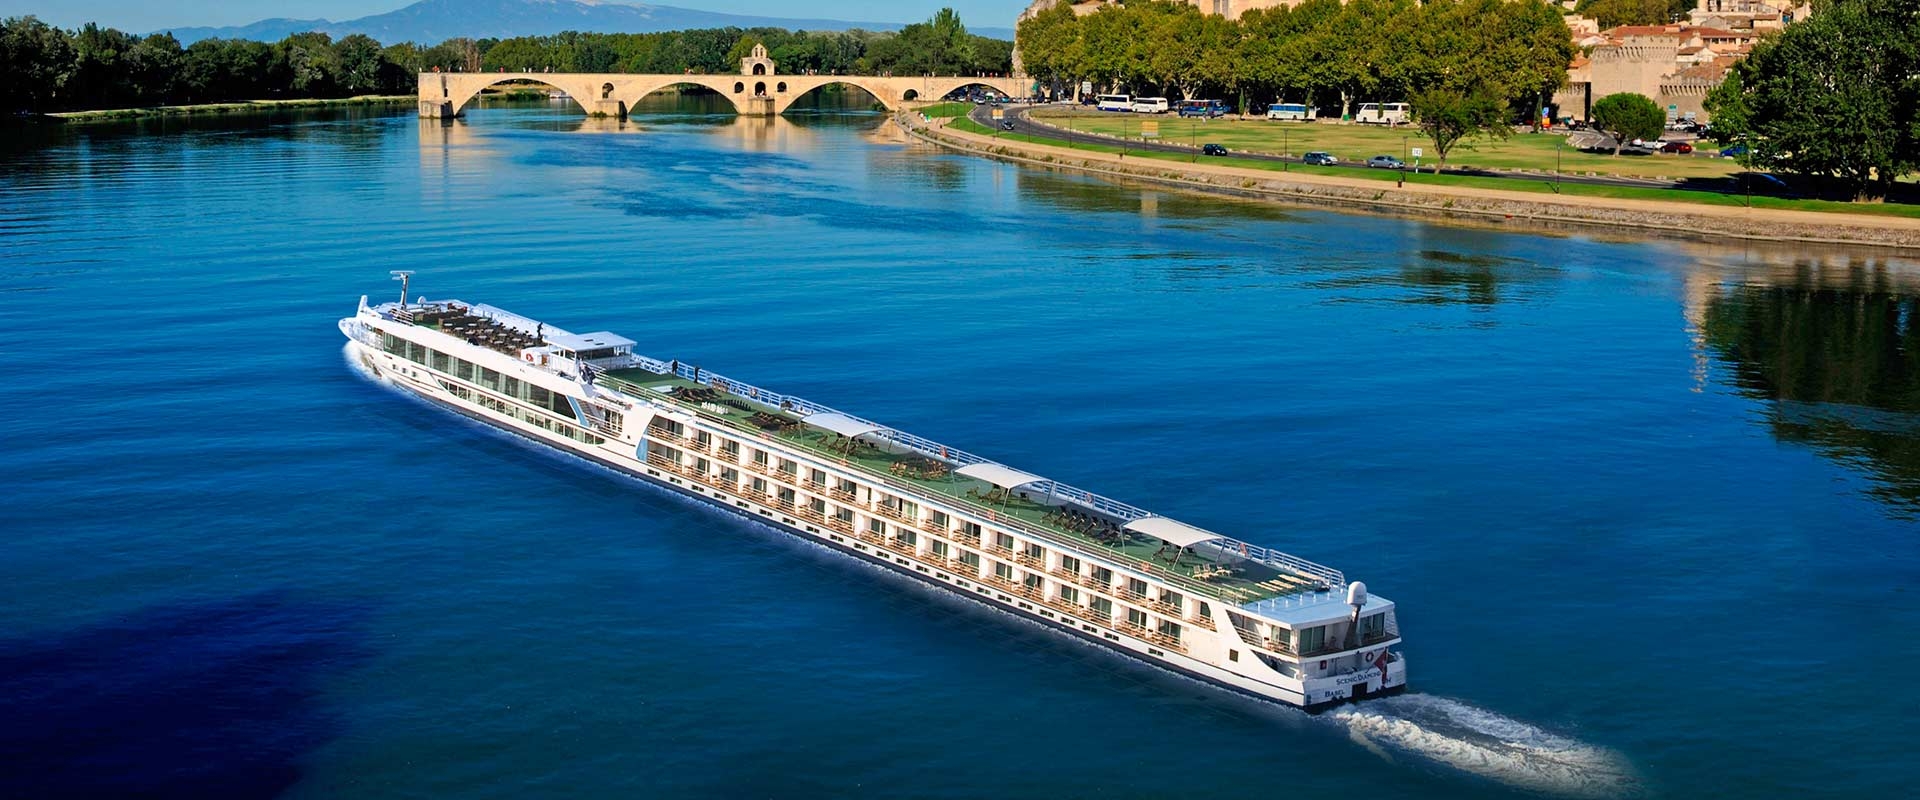 scenic cruises south of france